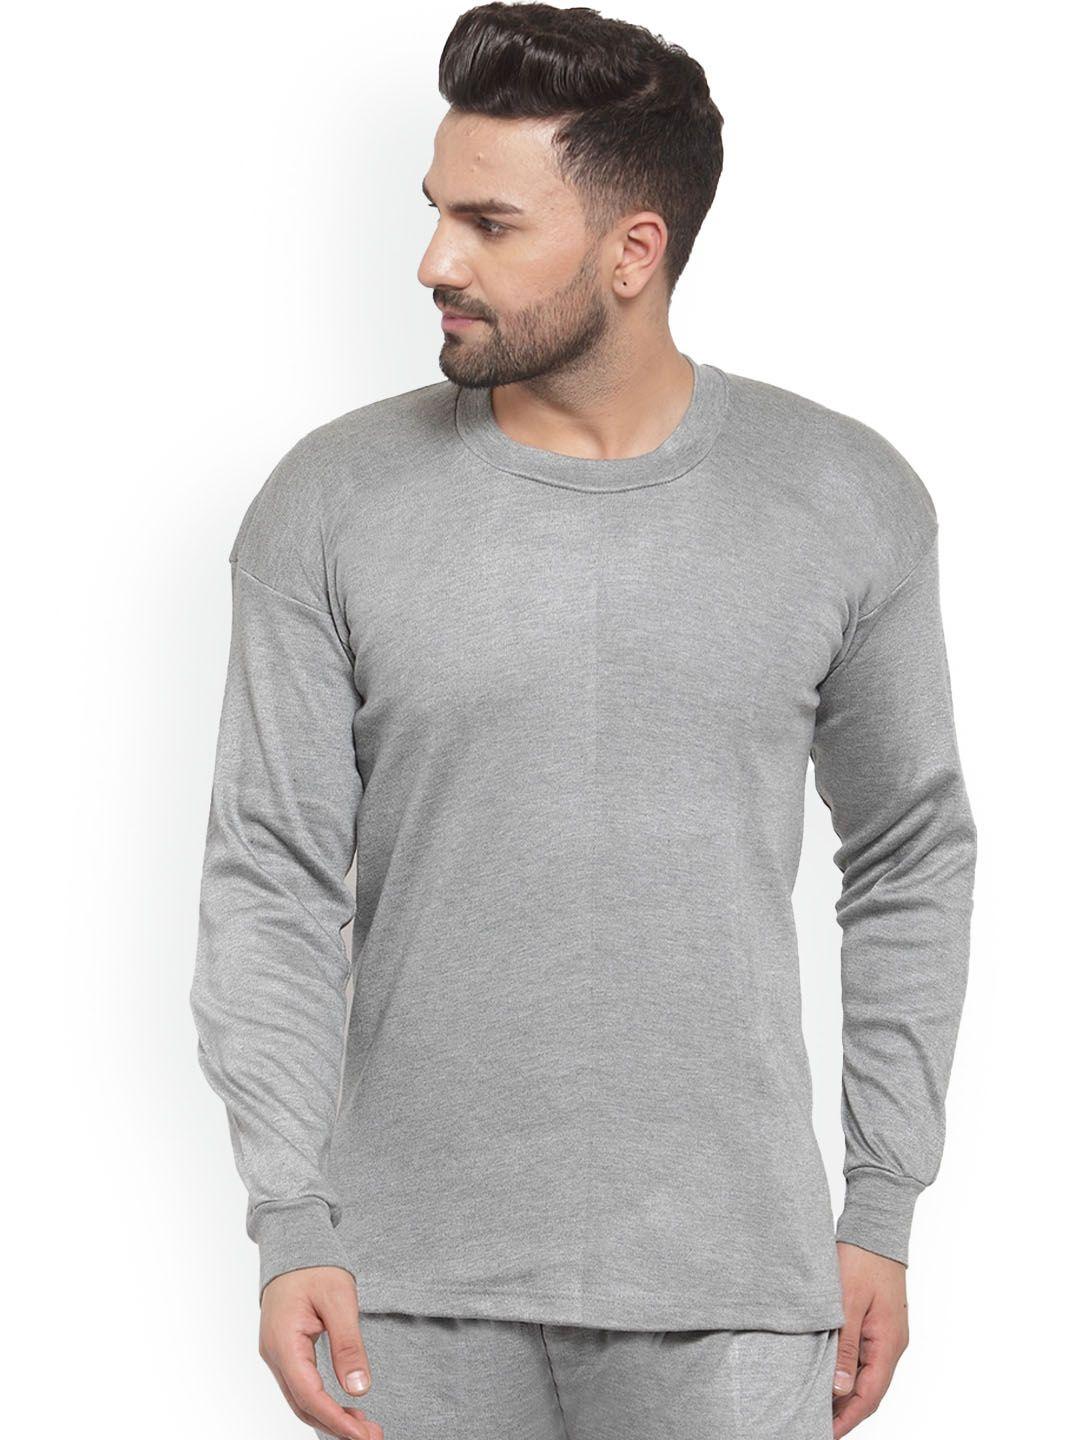 uzarus-round-neck-long-sleeves-cotton-thermal-top